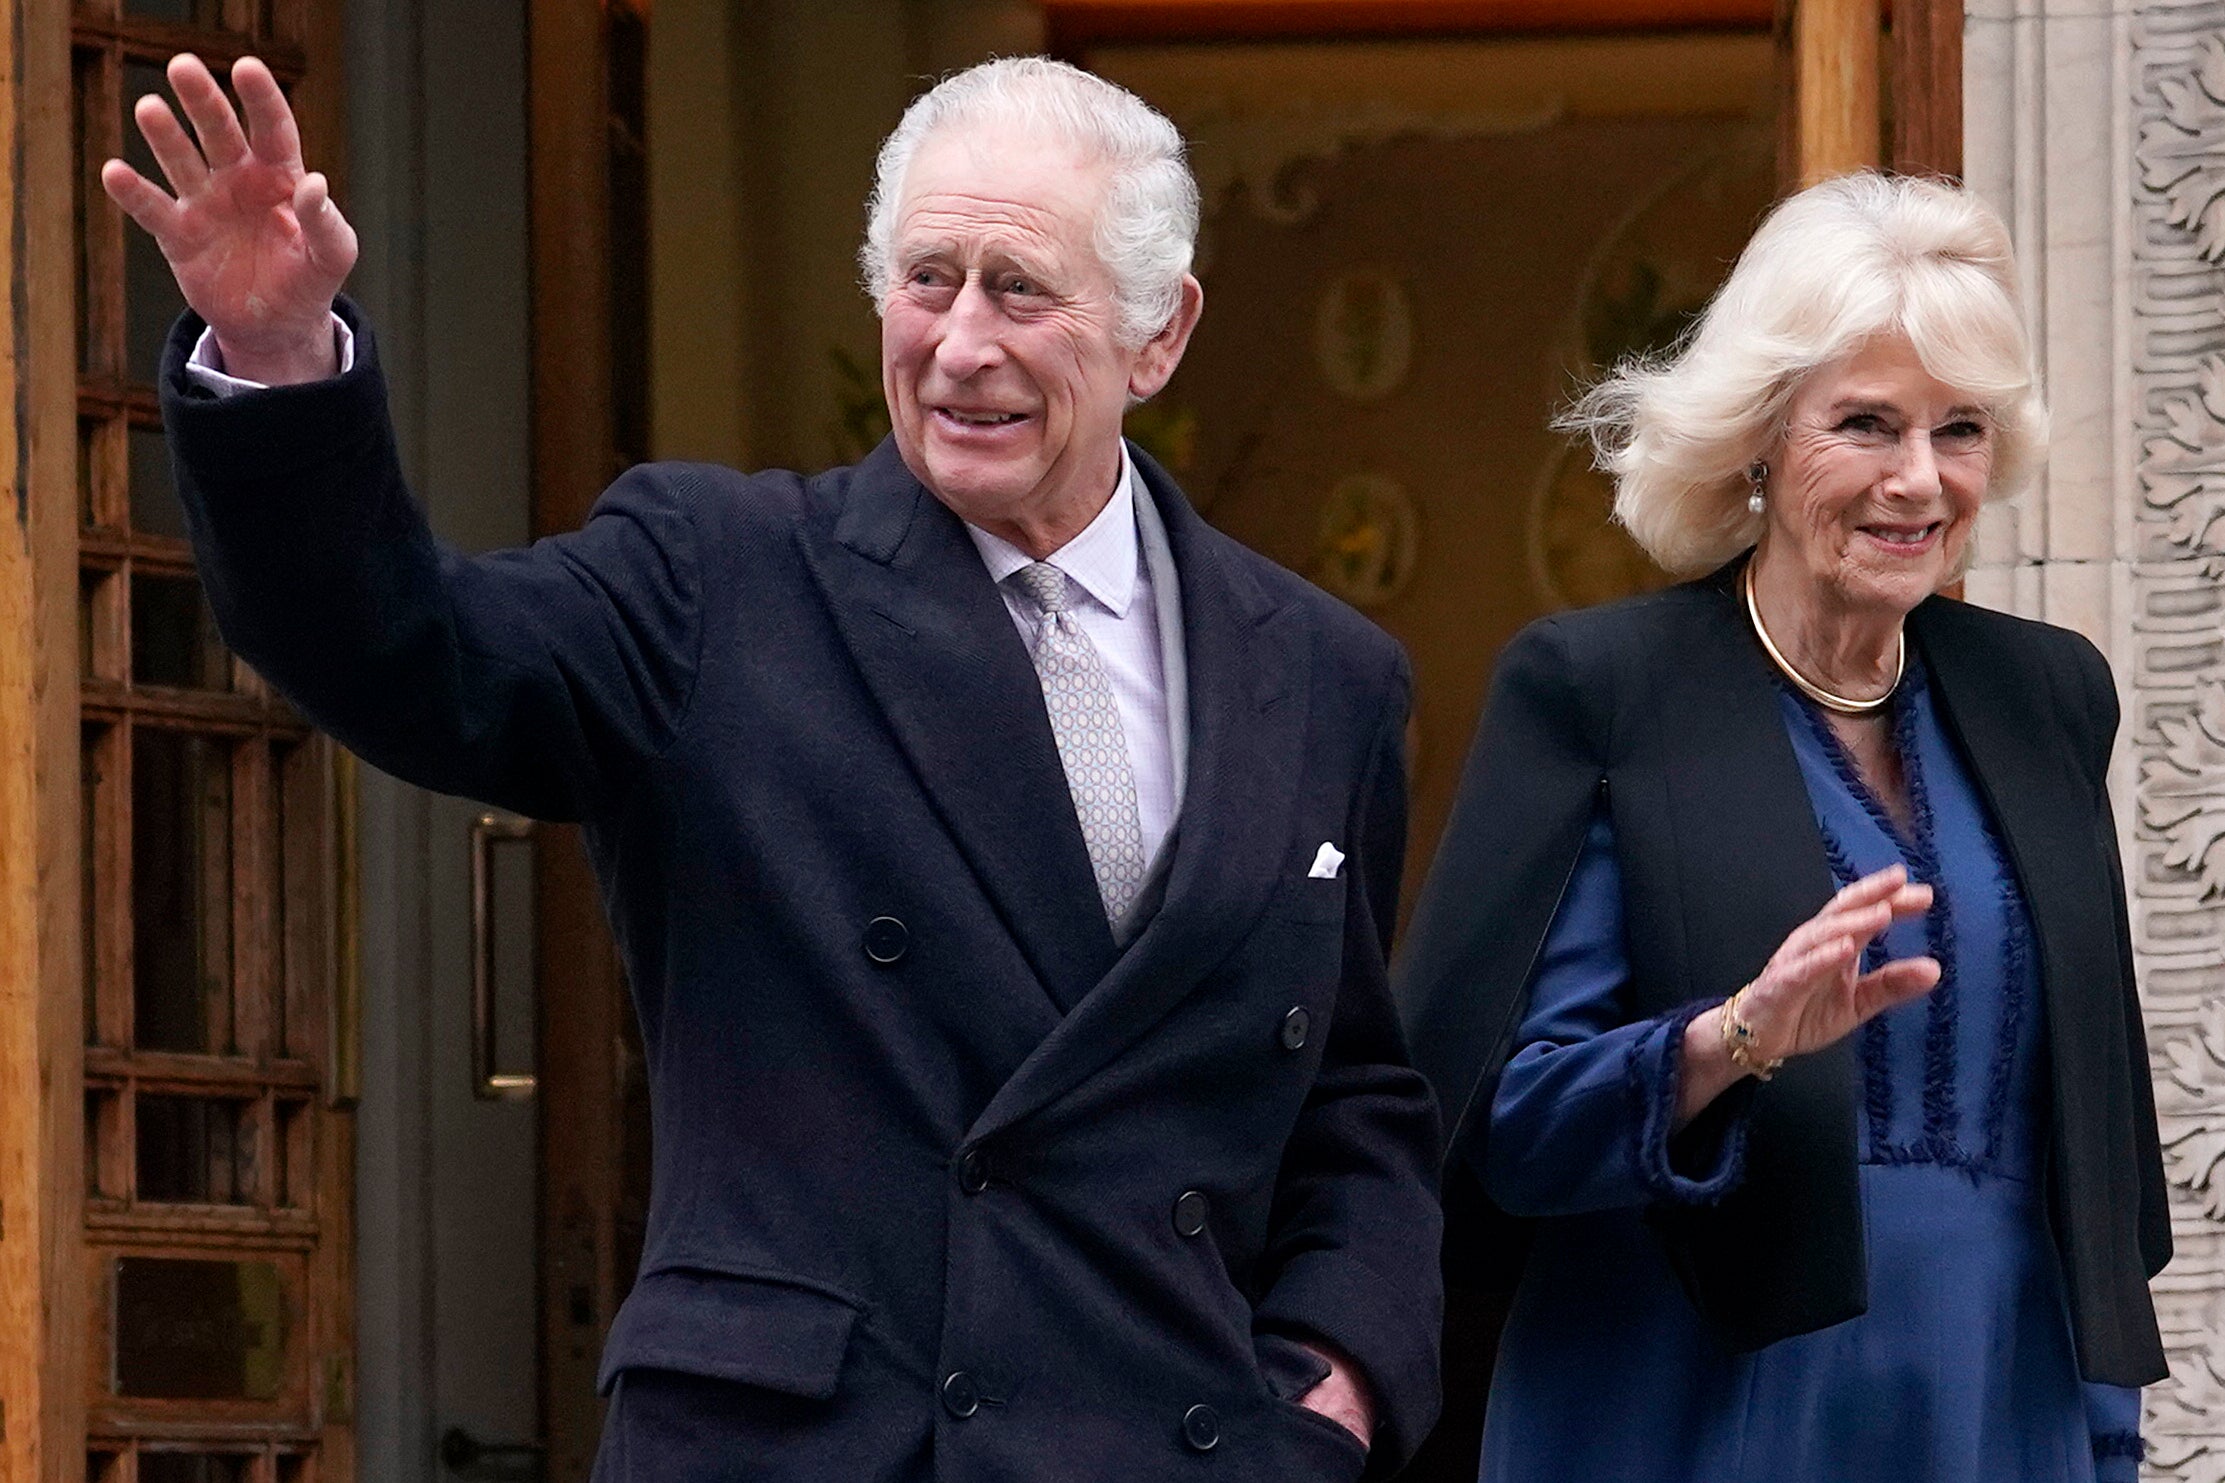 The King smiled and waved to members of the public as he left the private hospital with the Queen